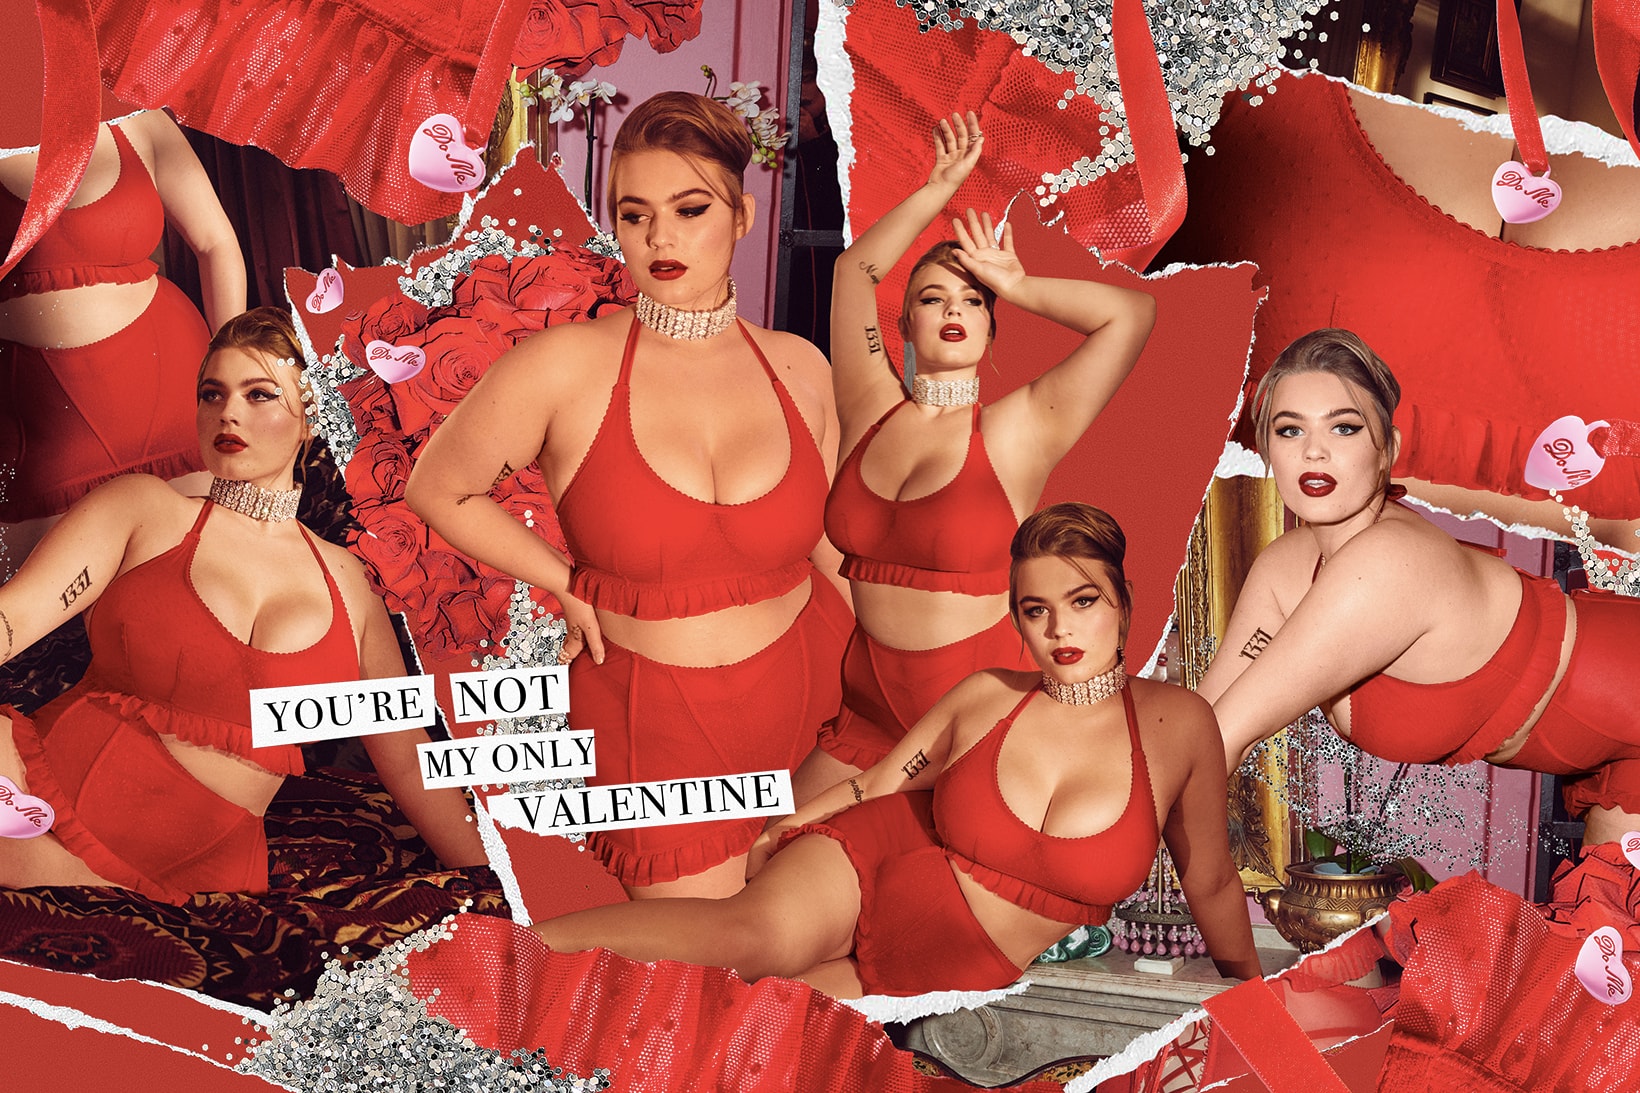 The Savage X Fenty Valentine's Day Collection Is Almost Too Hot to Handle